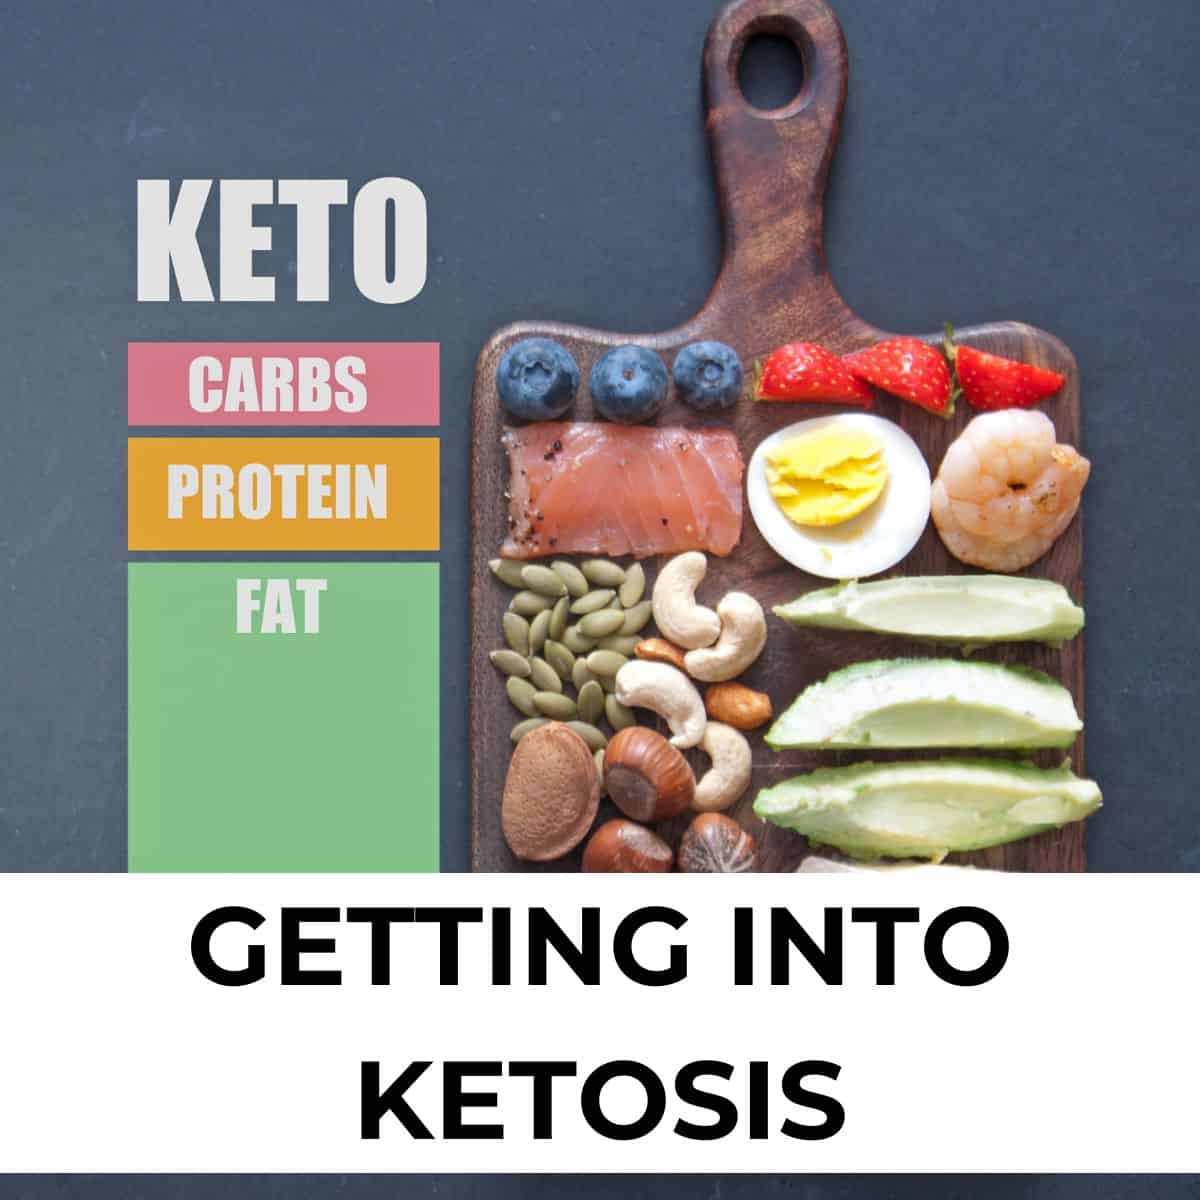 square image of keto foods with the words "getting into ketosis".